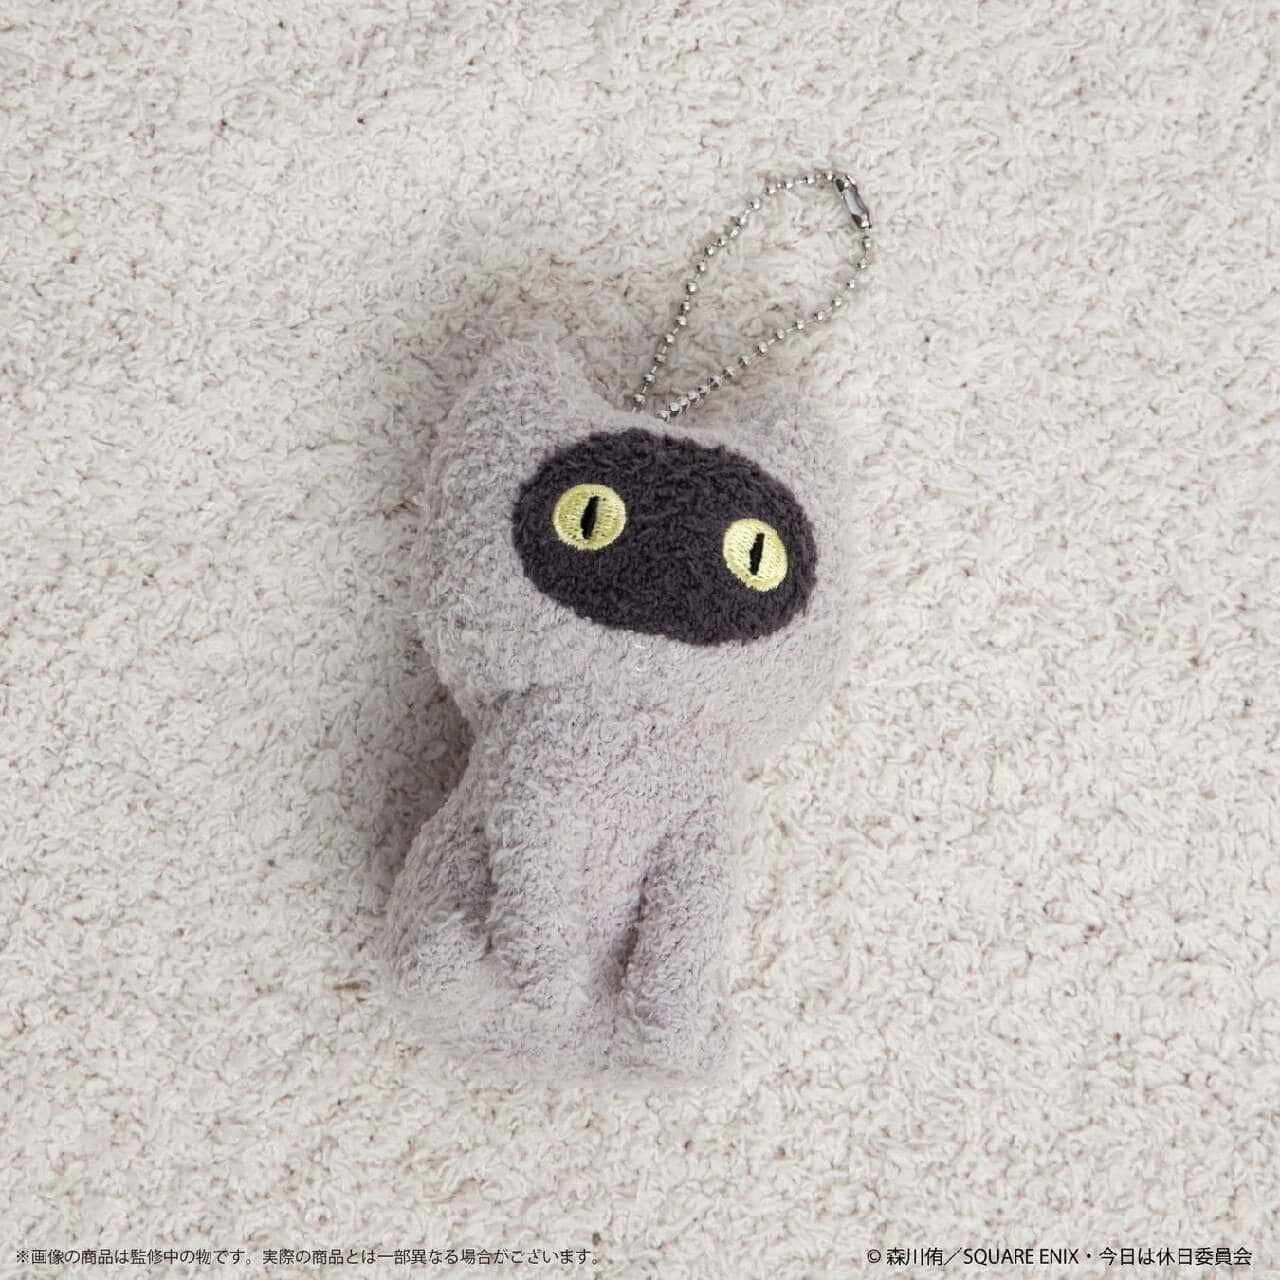 Village Vanguard and Palude collaborated to launch a wide variety of goods, including a fluffy key holder and amigurumi dolls based on the image of the TV animation "Holiday no Warumono-san" from the end of August to mid-September.